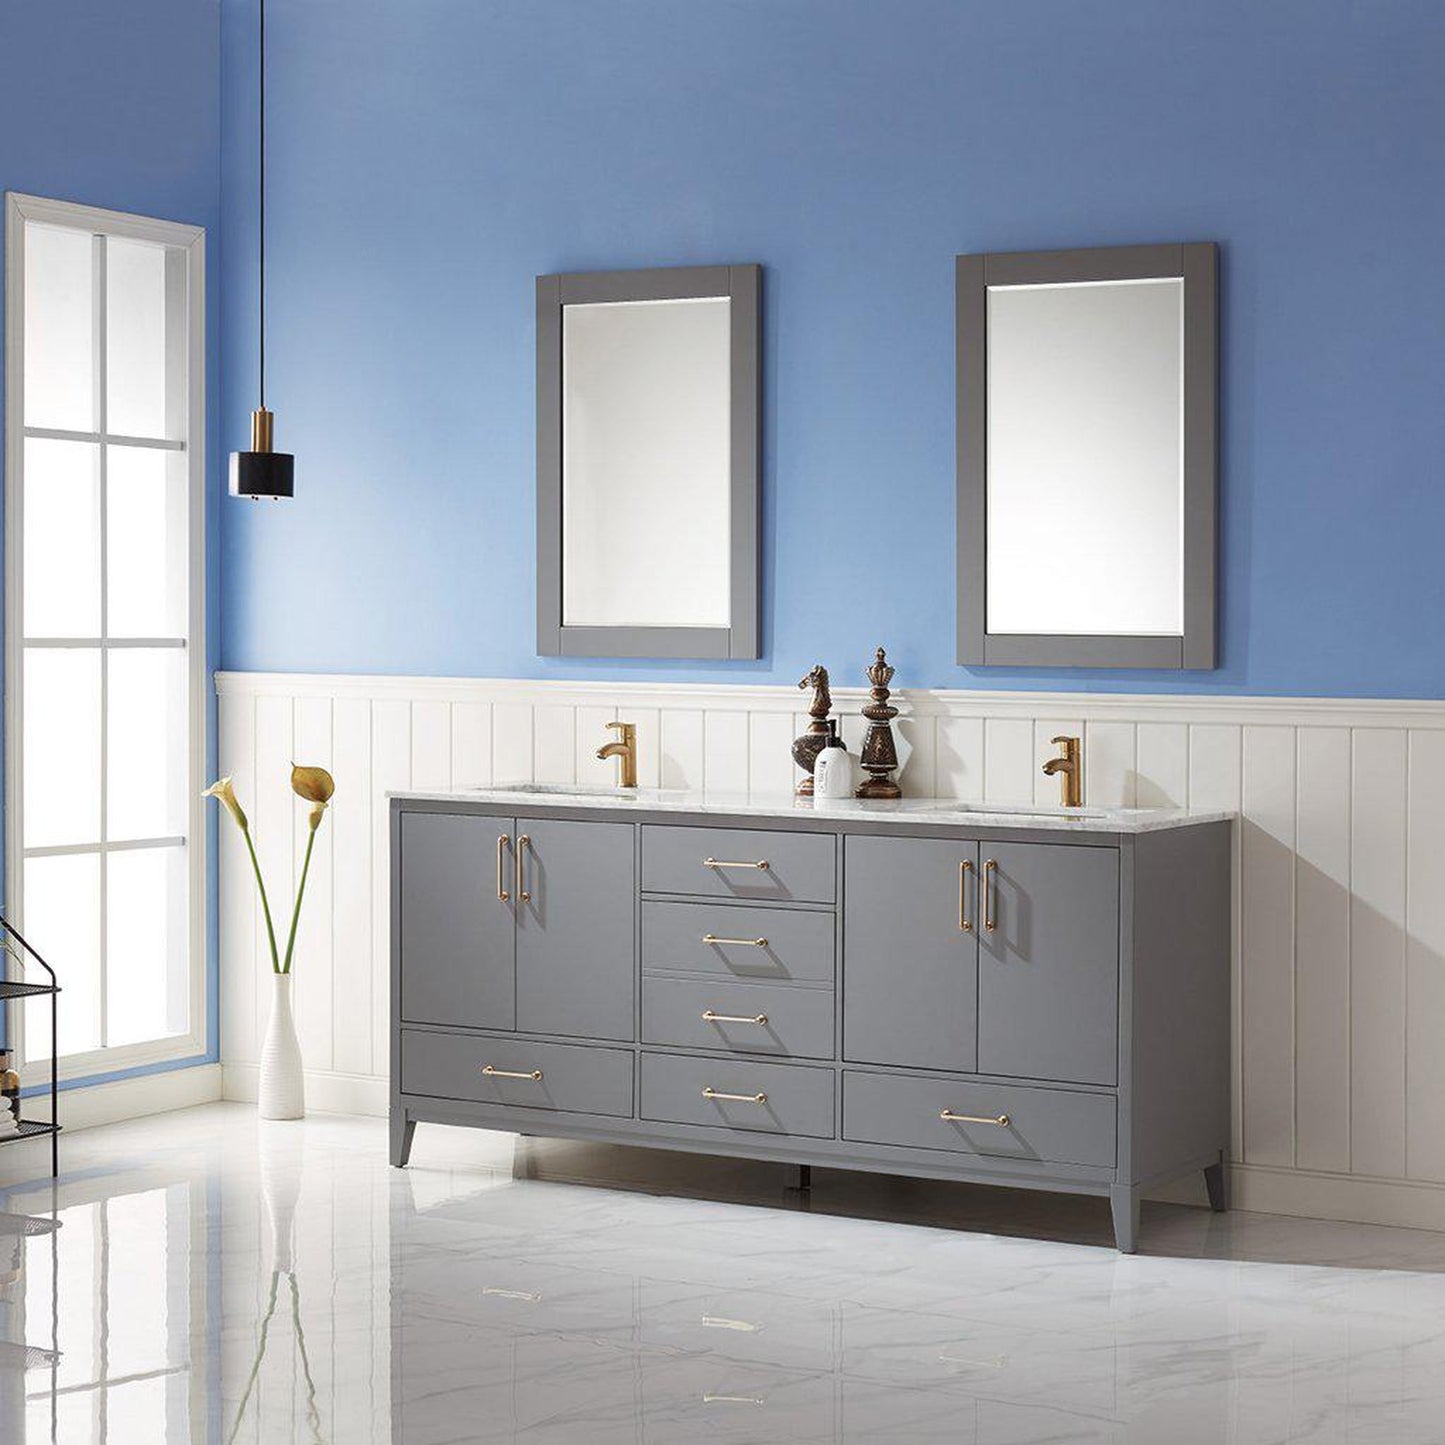 Altair Sutton 72" Double Gray Freestanding Bathroom Vanity Set With Mirror, Natural Carrara White Marble Two Rectangular Undermount Ceramic Sinks, and Overflow